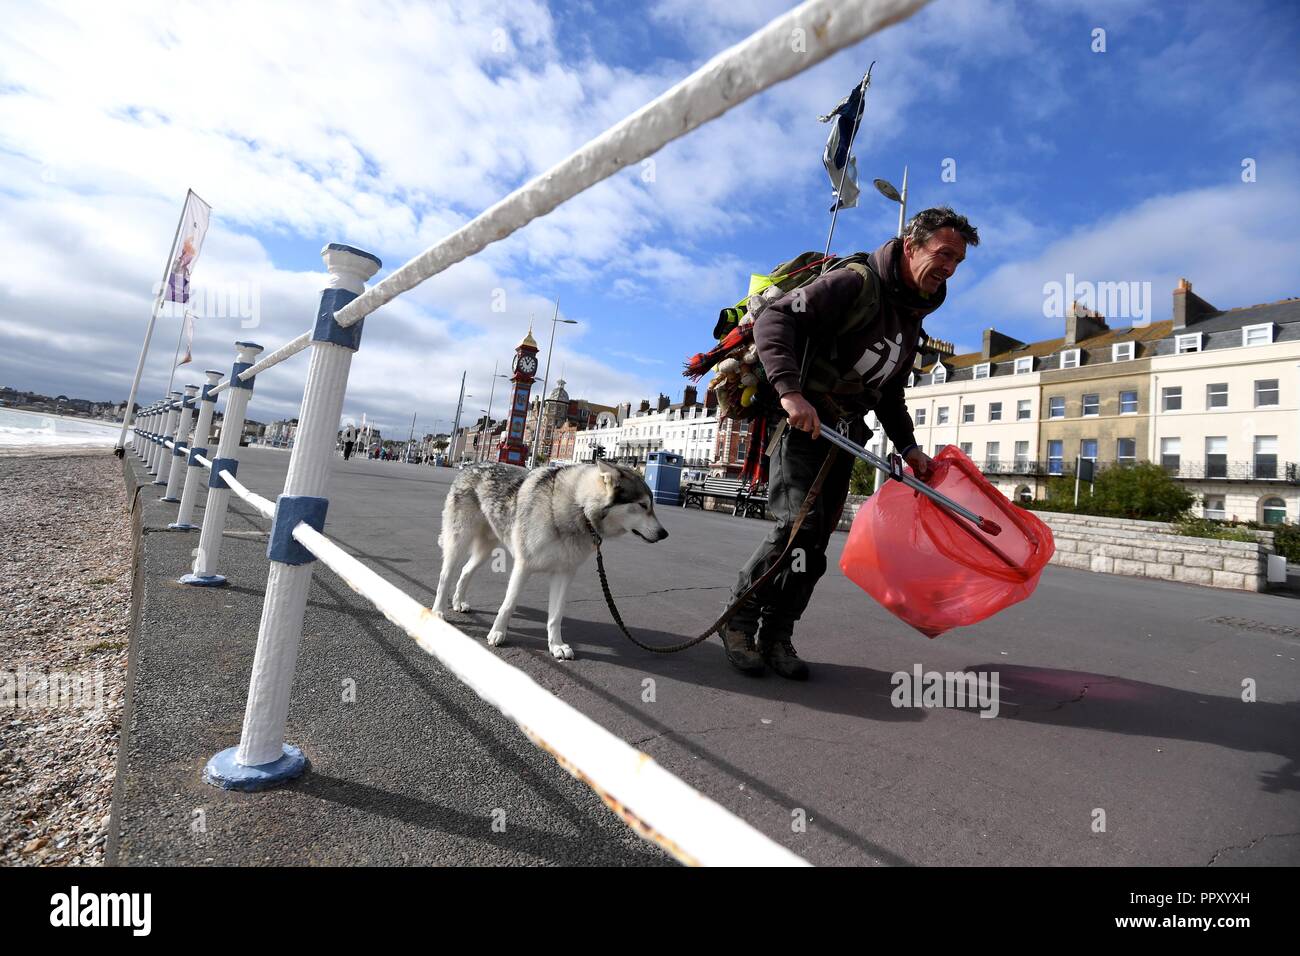 Wayne Dixon, 47, halfway through his journey to collect litter along the whole coast of Britain. Presently in Weymouth and is raising money for charities MIND and the Northern Inuit Dog Society. He is completing his challenge with his dog Koda, a Northern Inuit, and says he is ‘fulfilling a lifelong dream by walking the coast of Britain.’ “I am picking up litter across the whole coast of Britain. I pick up every piece of litter I walk past.  Credit: Finnbarr Webster/Alamy Live News Stock Photo